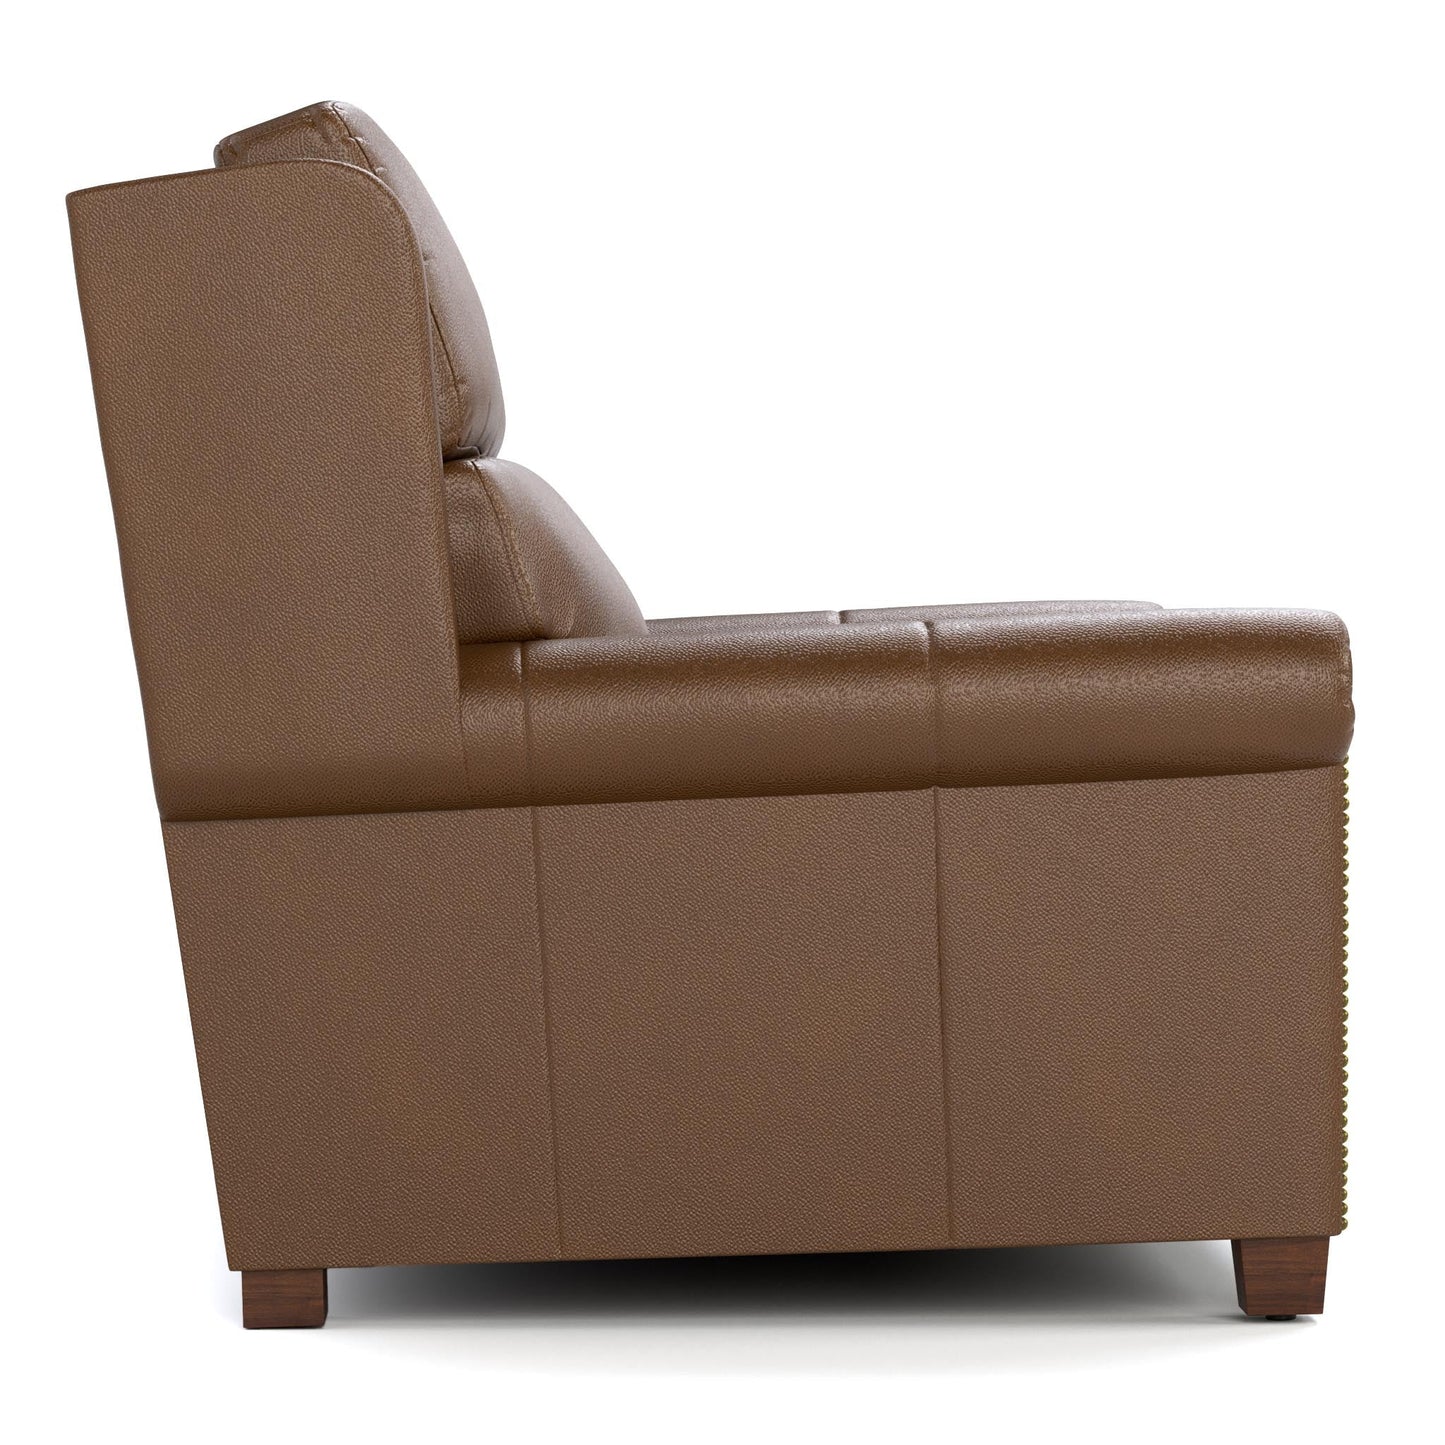 Woodlands Small Roll Arm Motion Sofa with Nails